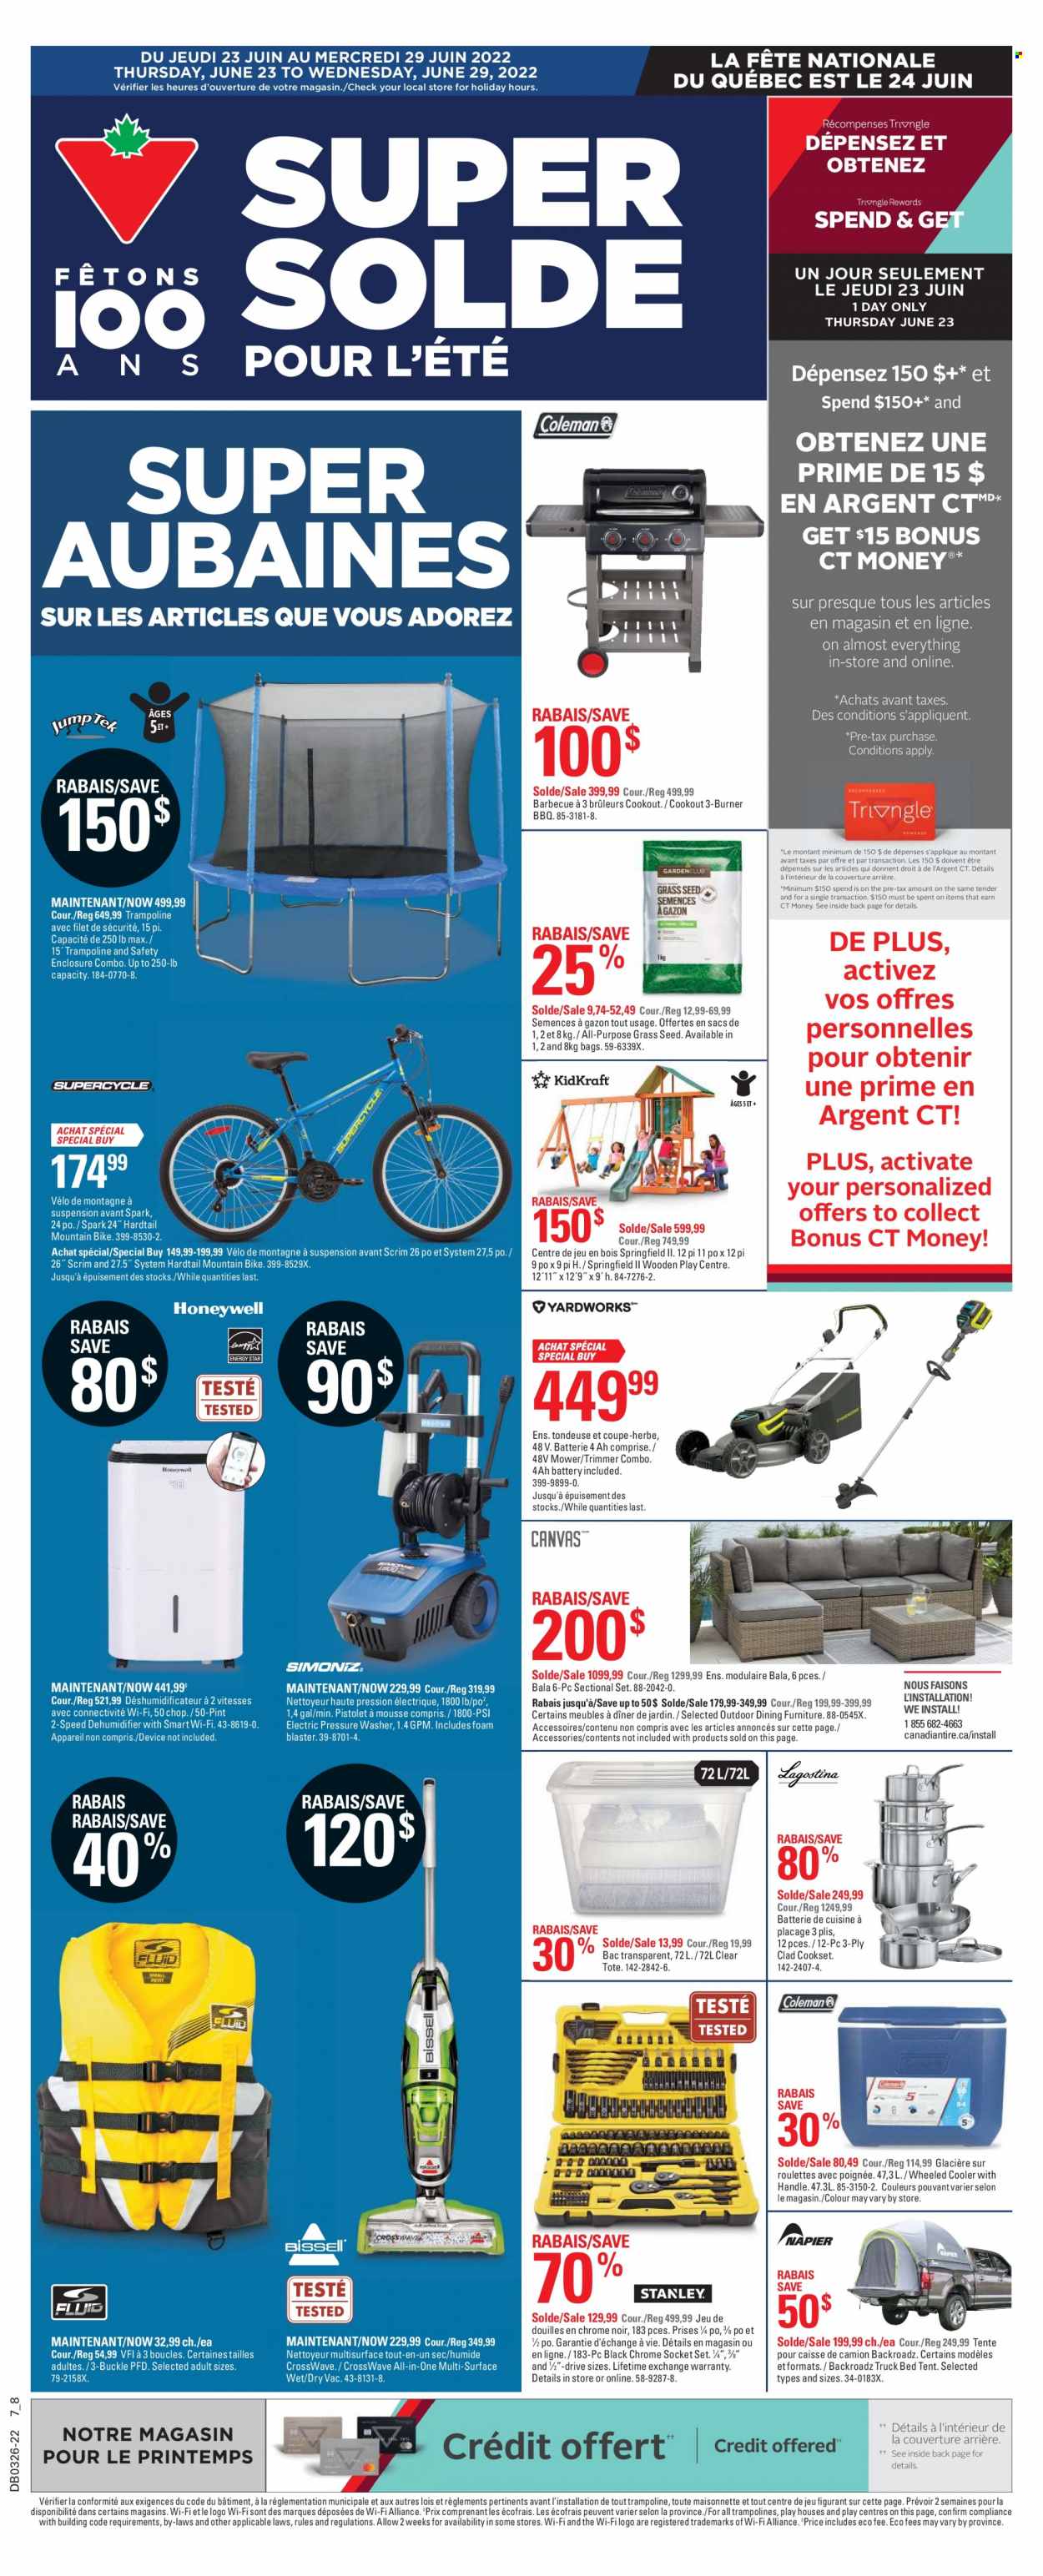 thumbnail - Canadian Tire Flyer - June 23, 2022 - June 29, 2022 - Sales products - bag, wheeled cooler, deco strips, canvas, Honeywell, Bissell, vacuum cleaner, trimmer, bed, tote, Coleman, mountain bike, trampoline, tent, KidKraft, Stanley, socket, socket set, electric pressure washer, pressure washer, plant seeds, grass seed. Page 1.